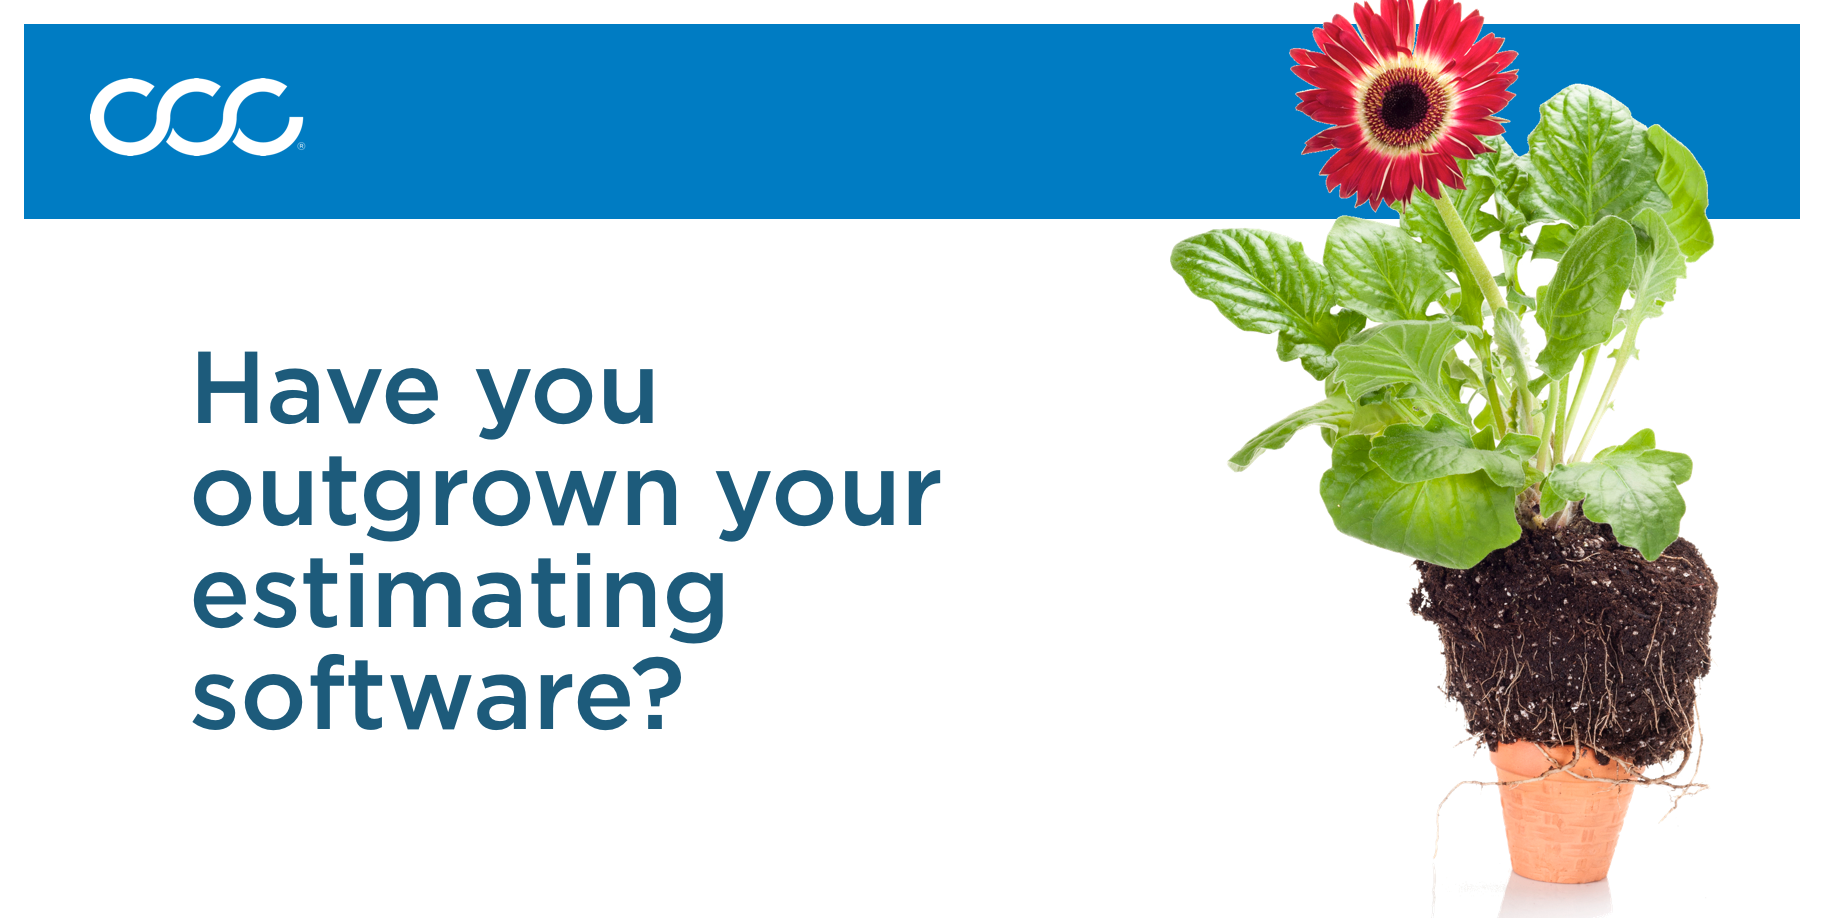 Have you outgrown your estimating software?